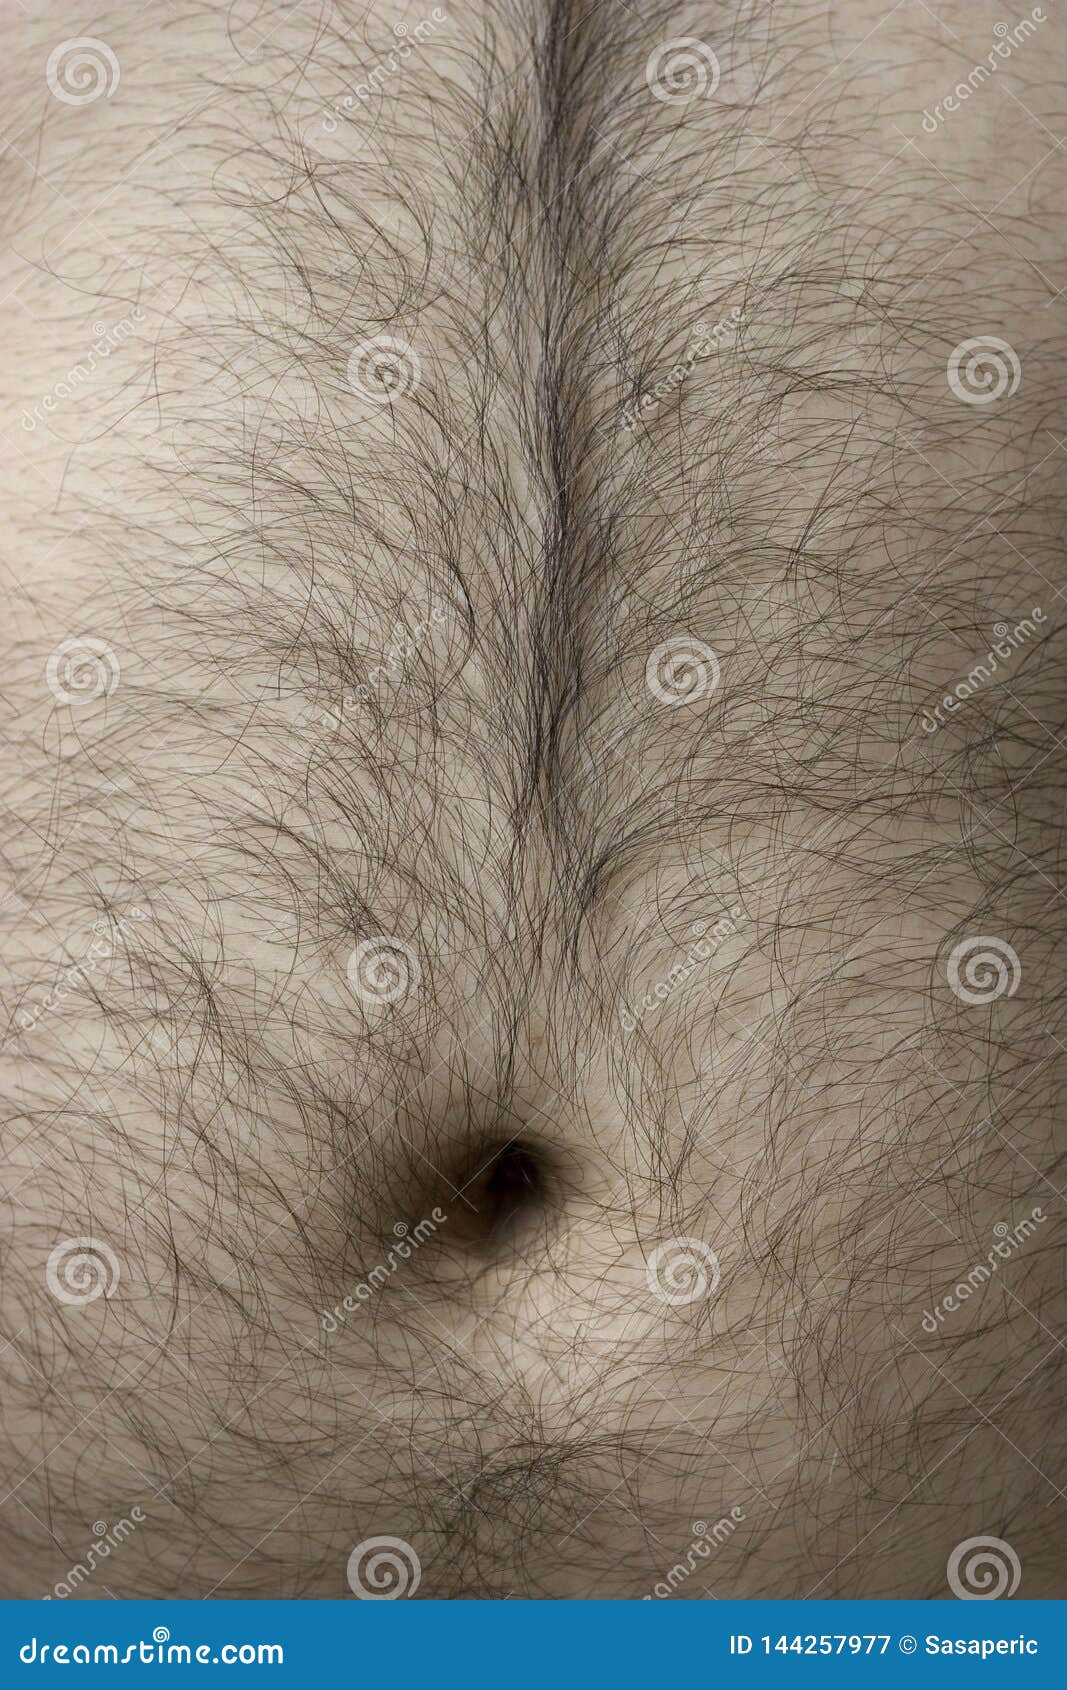 Detail of Man`s Body - Belly with Hair Stock Image - Image of human, diet:  144257977